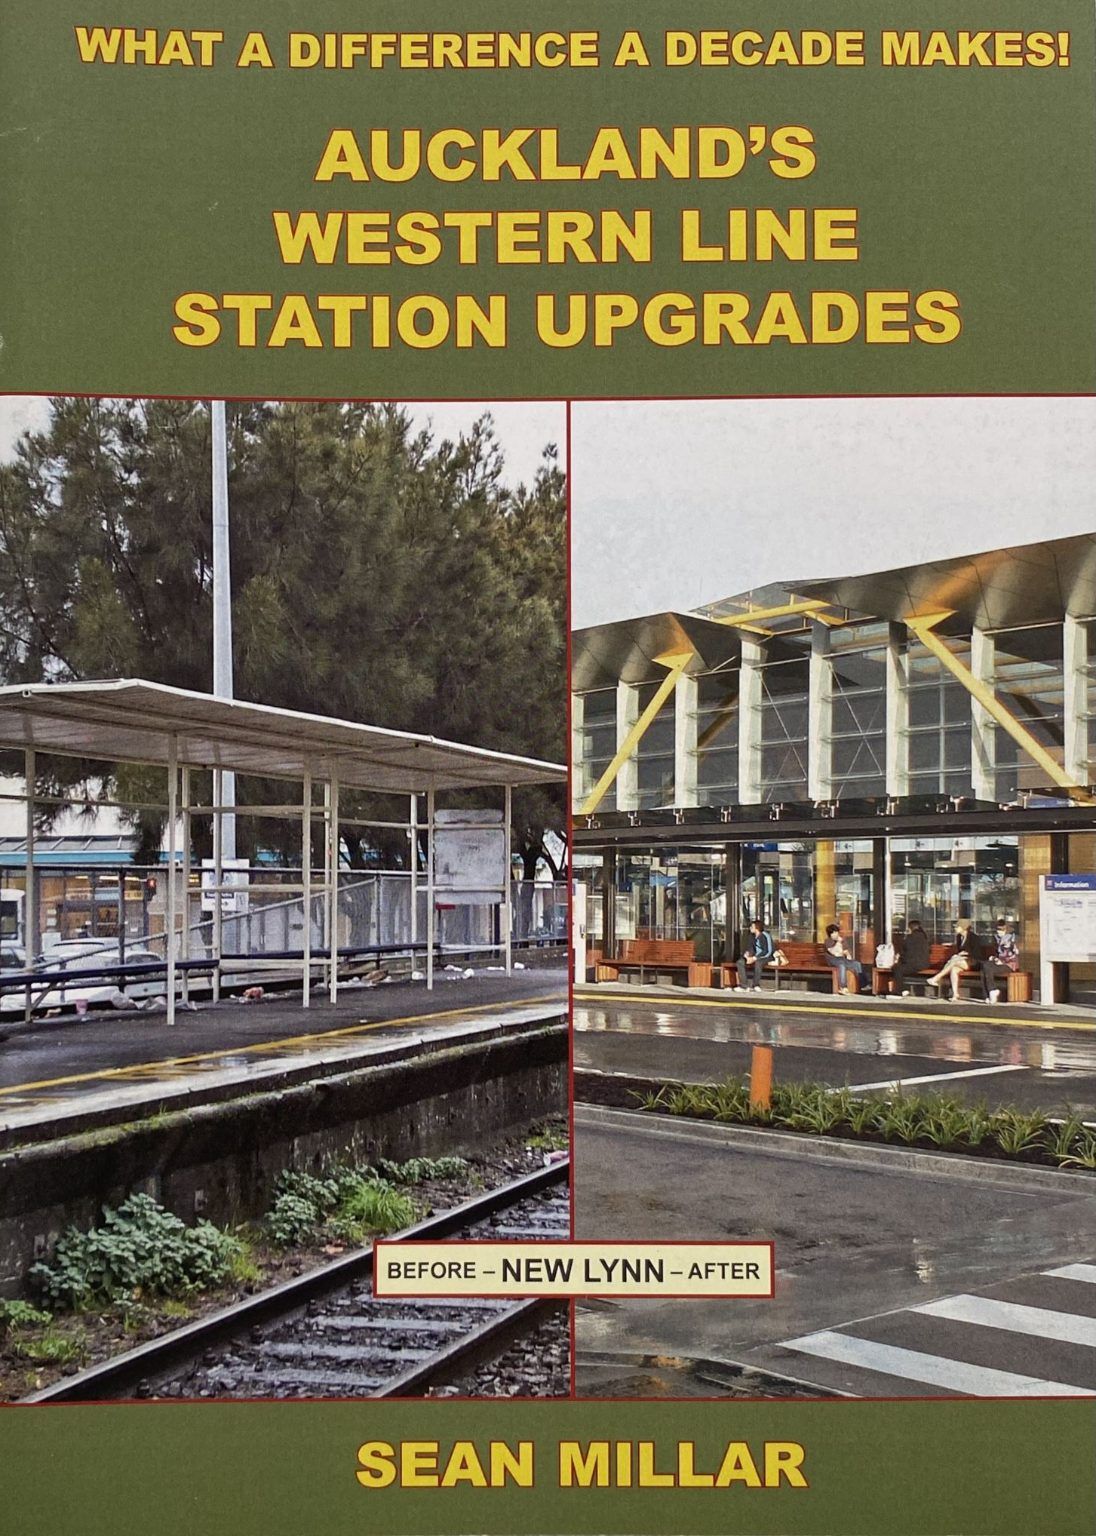 AUCKLAND'S WESTERN LINE STATION UPGRADES: New Lynn Before and After